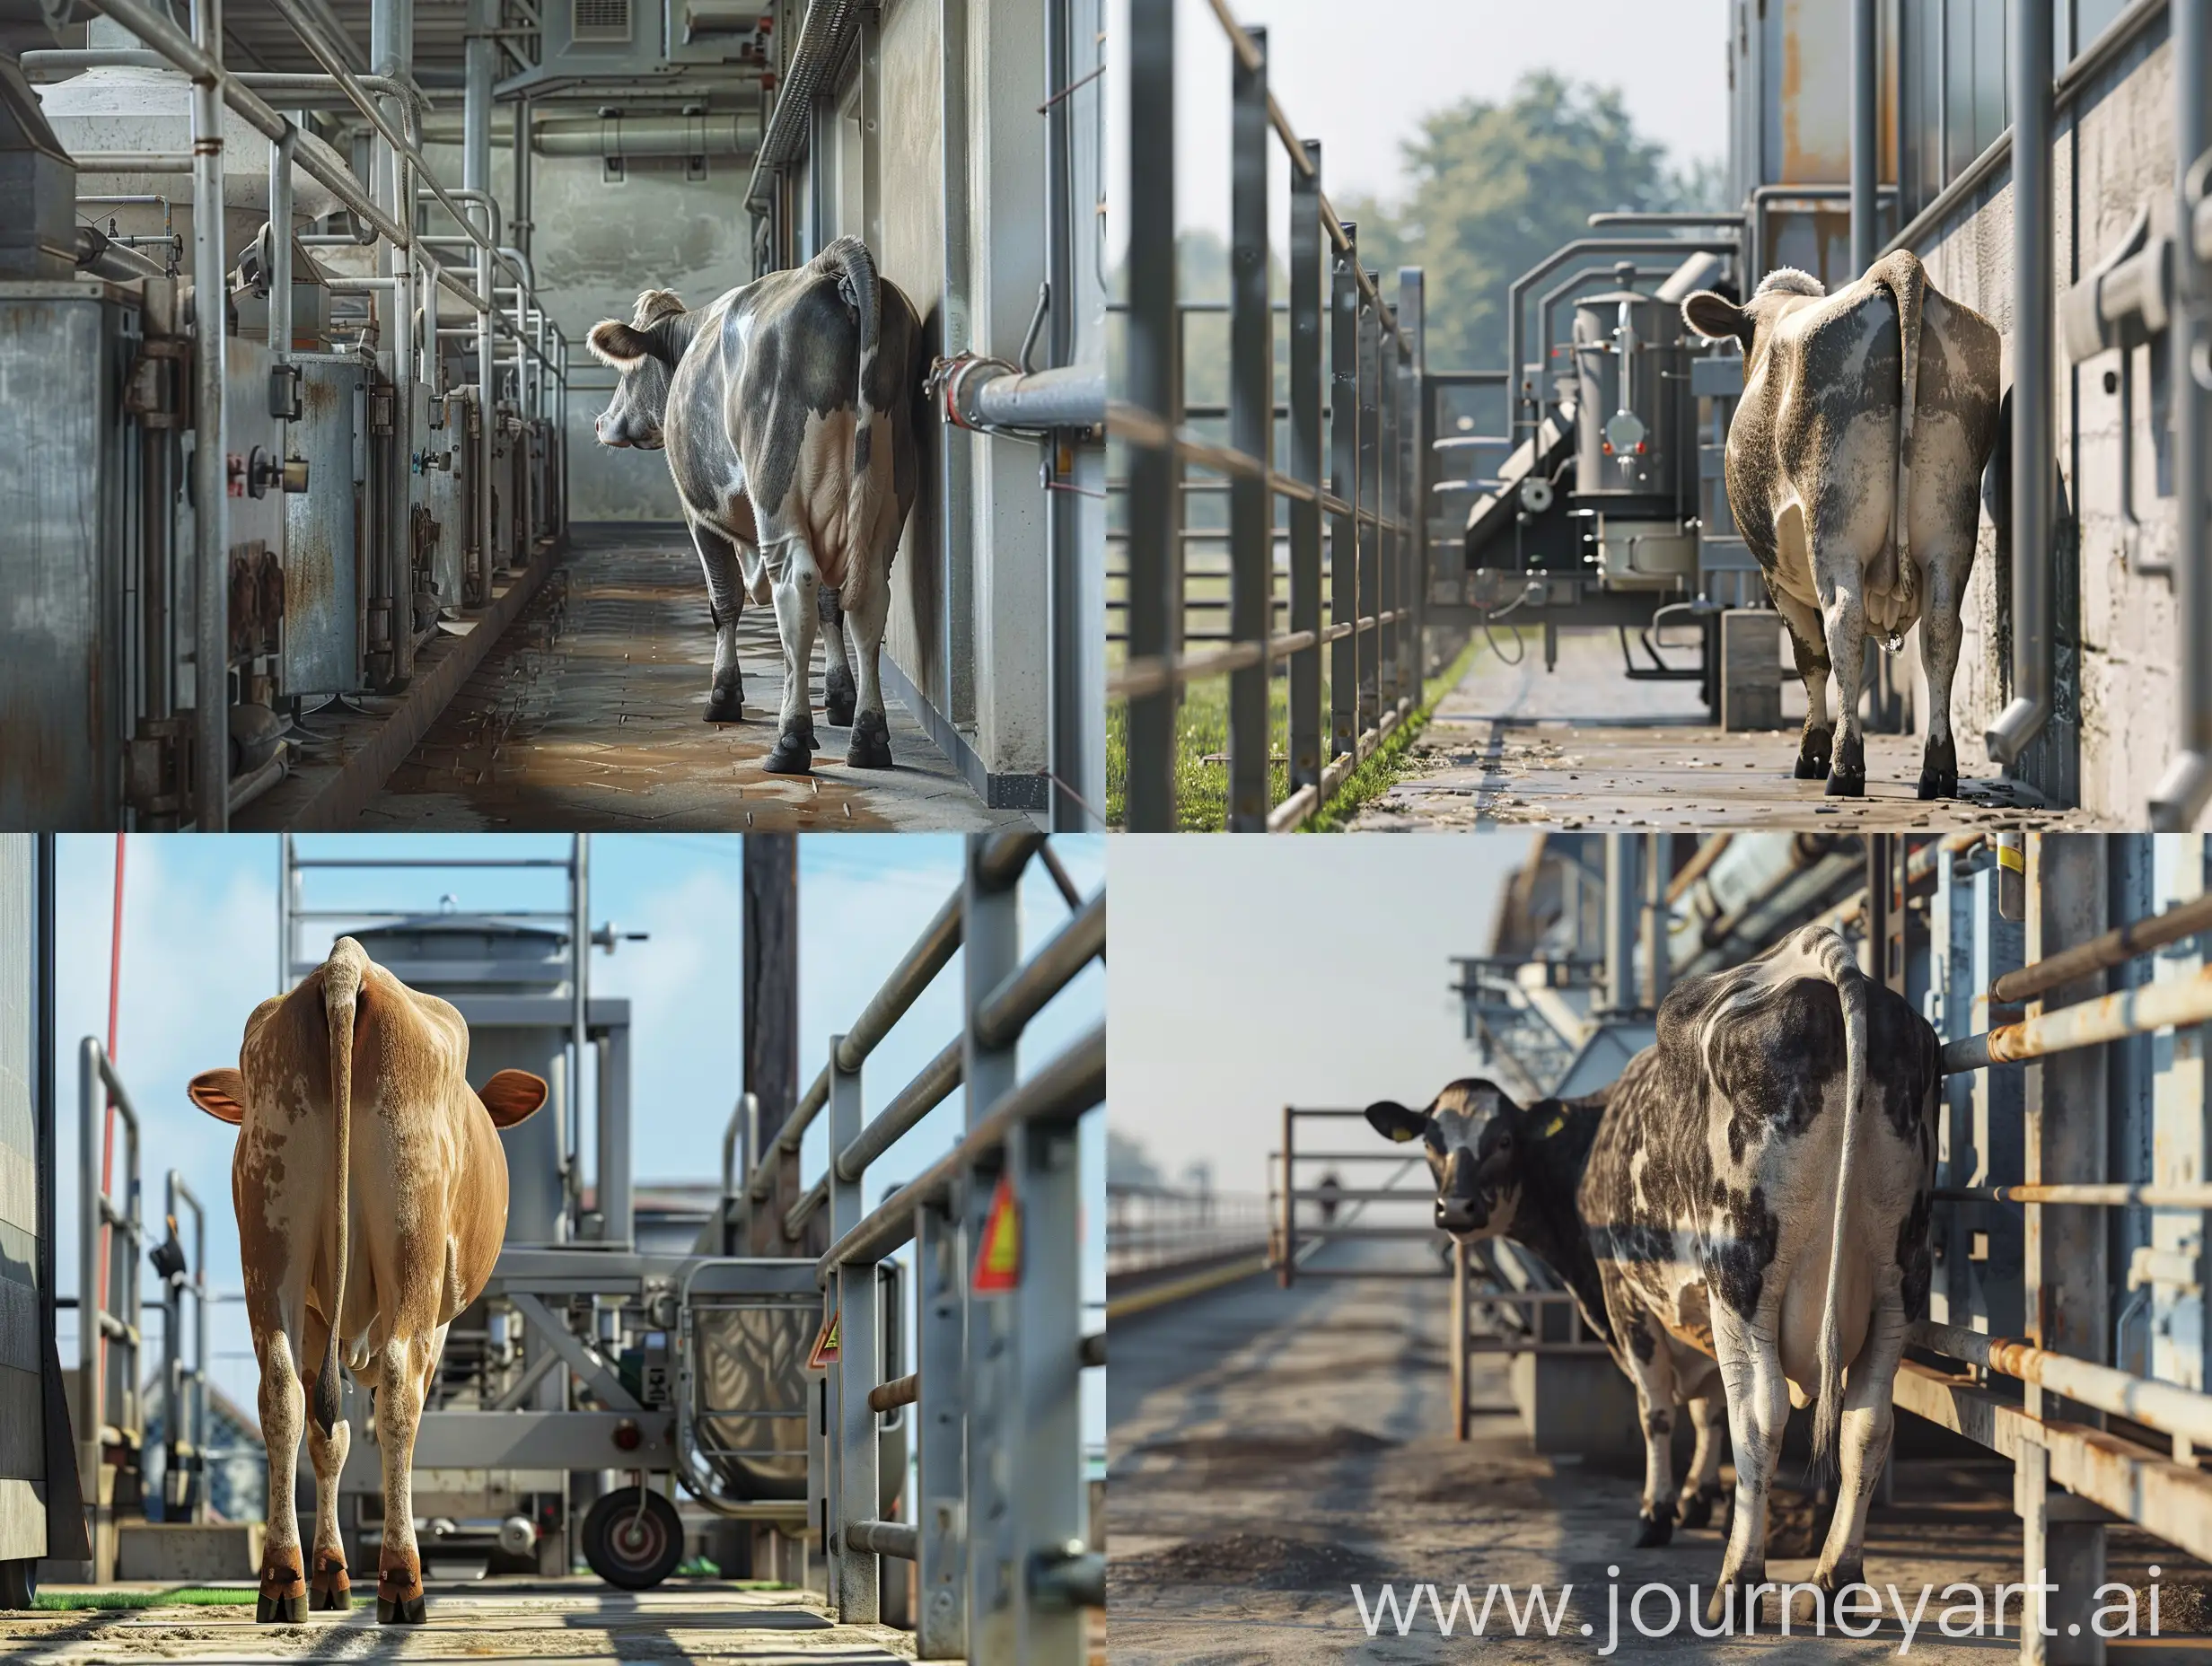 Graceful-Cow-by-Farm-Milking-Equipment-Realistic-169-Image